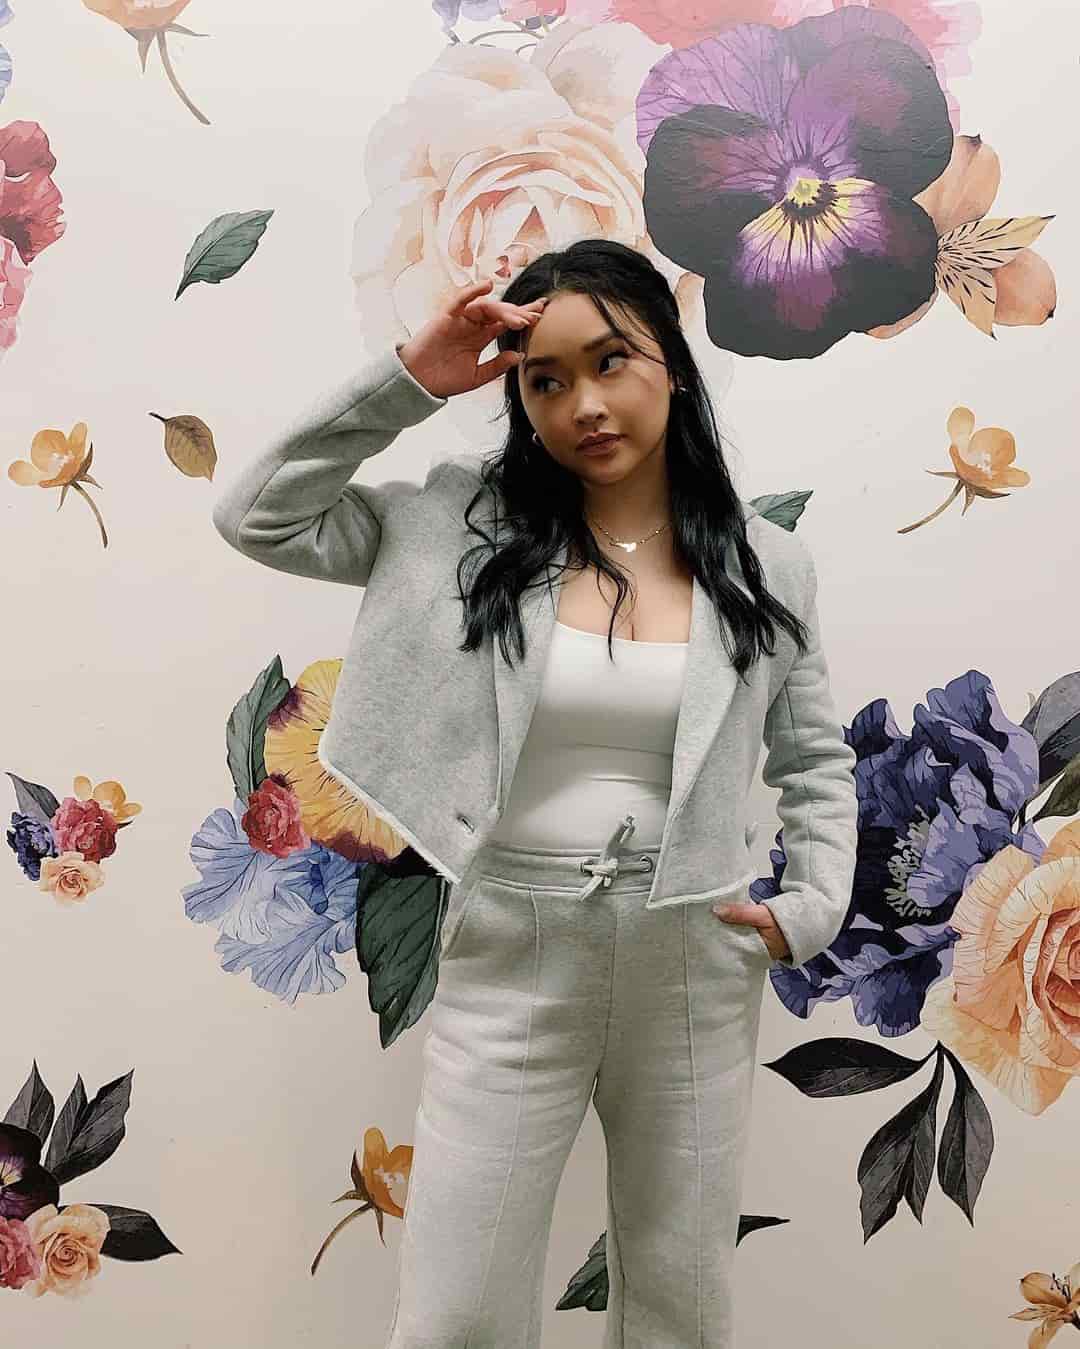 Lana Condor - Biography, Profile, Facts, and Career